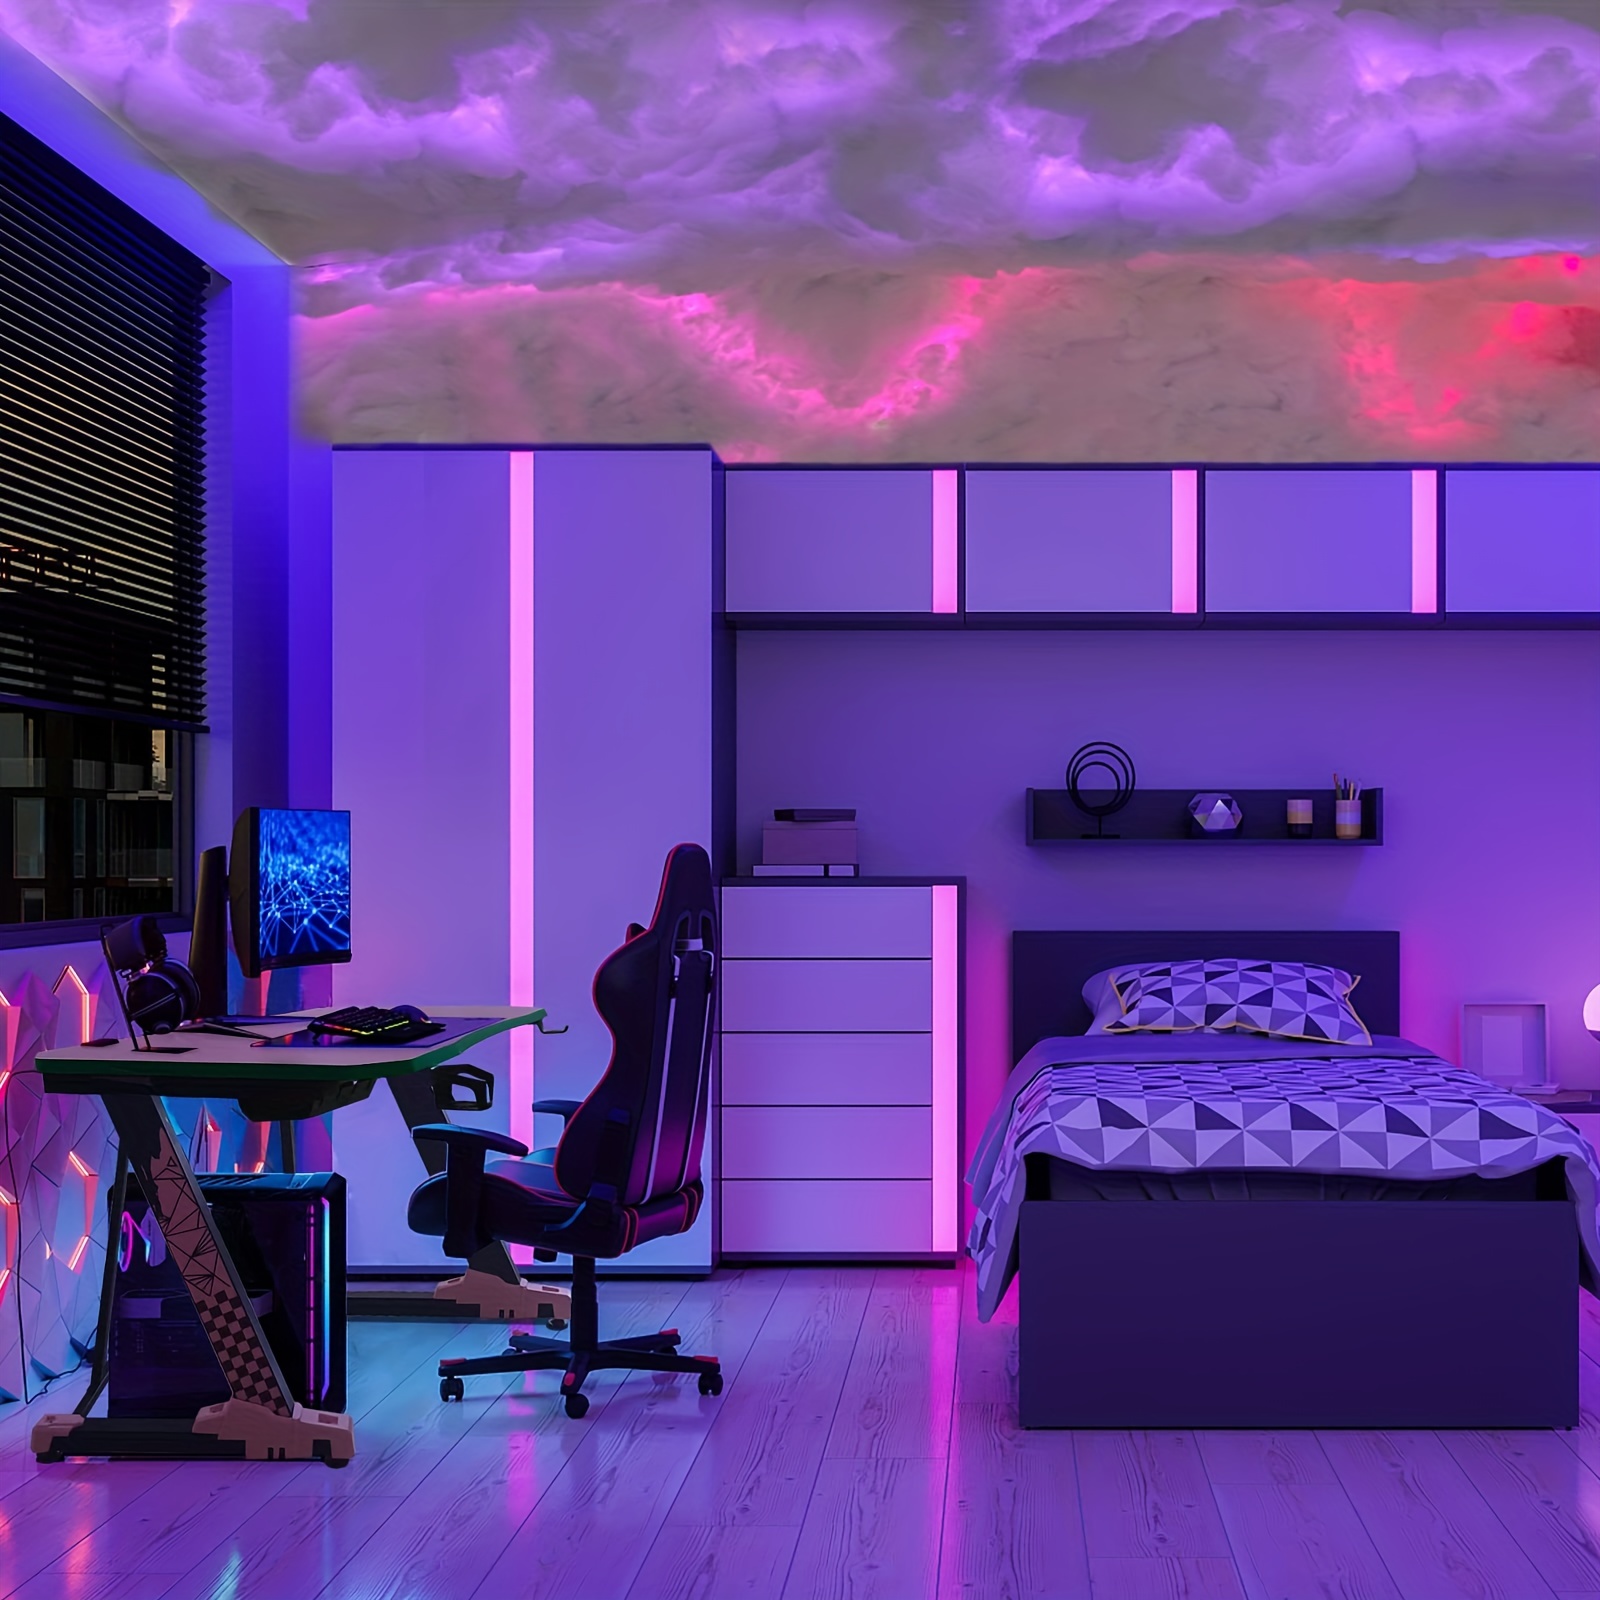 Thunder Cloud Light Led Smart Night Light RGB Cloud Wall Lamp Cool Creative  Cloud Light Atmosphere Light For Party Festival Lamp